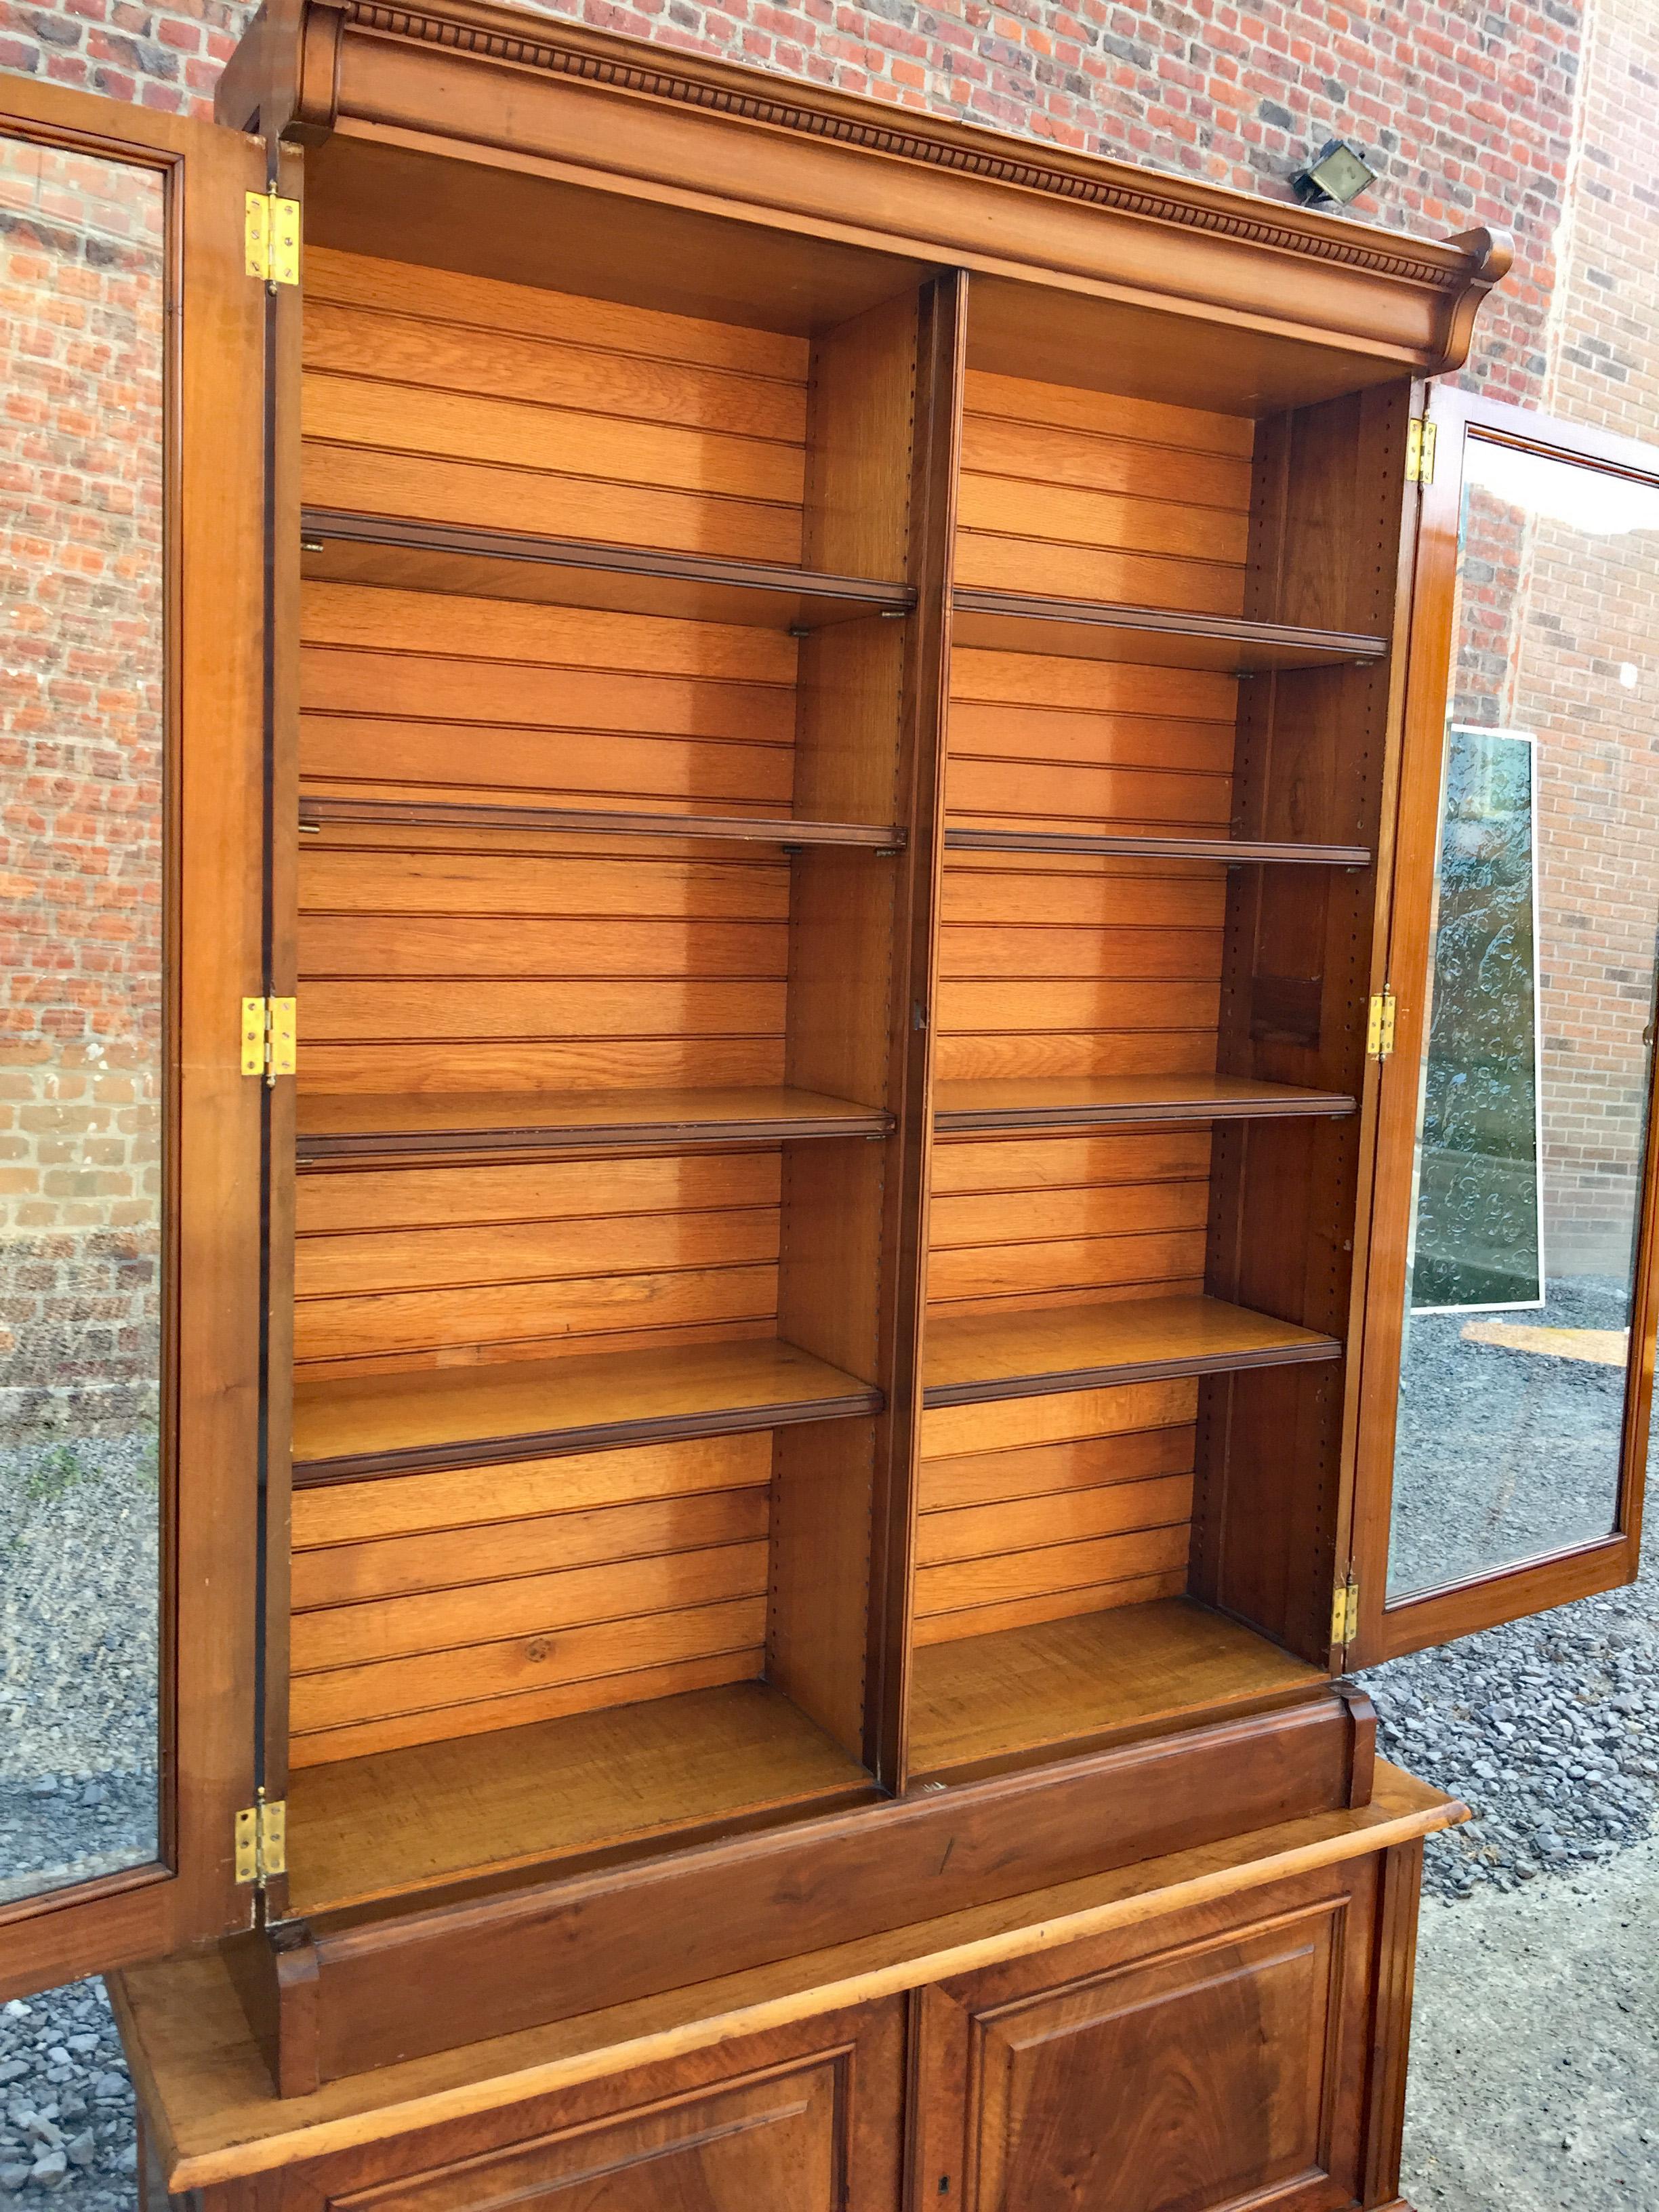 Storage Unit or Library in American Walnut, circa 1900 For Sale 2